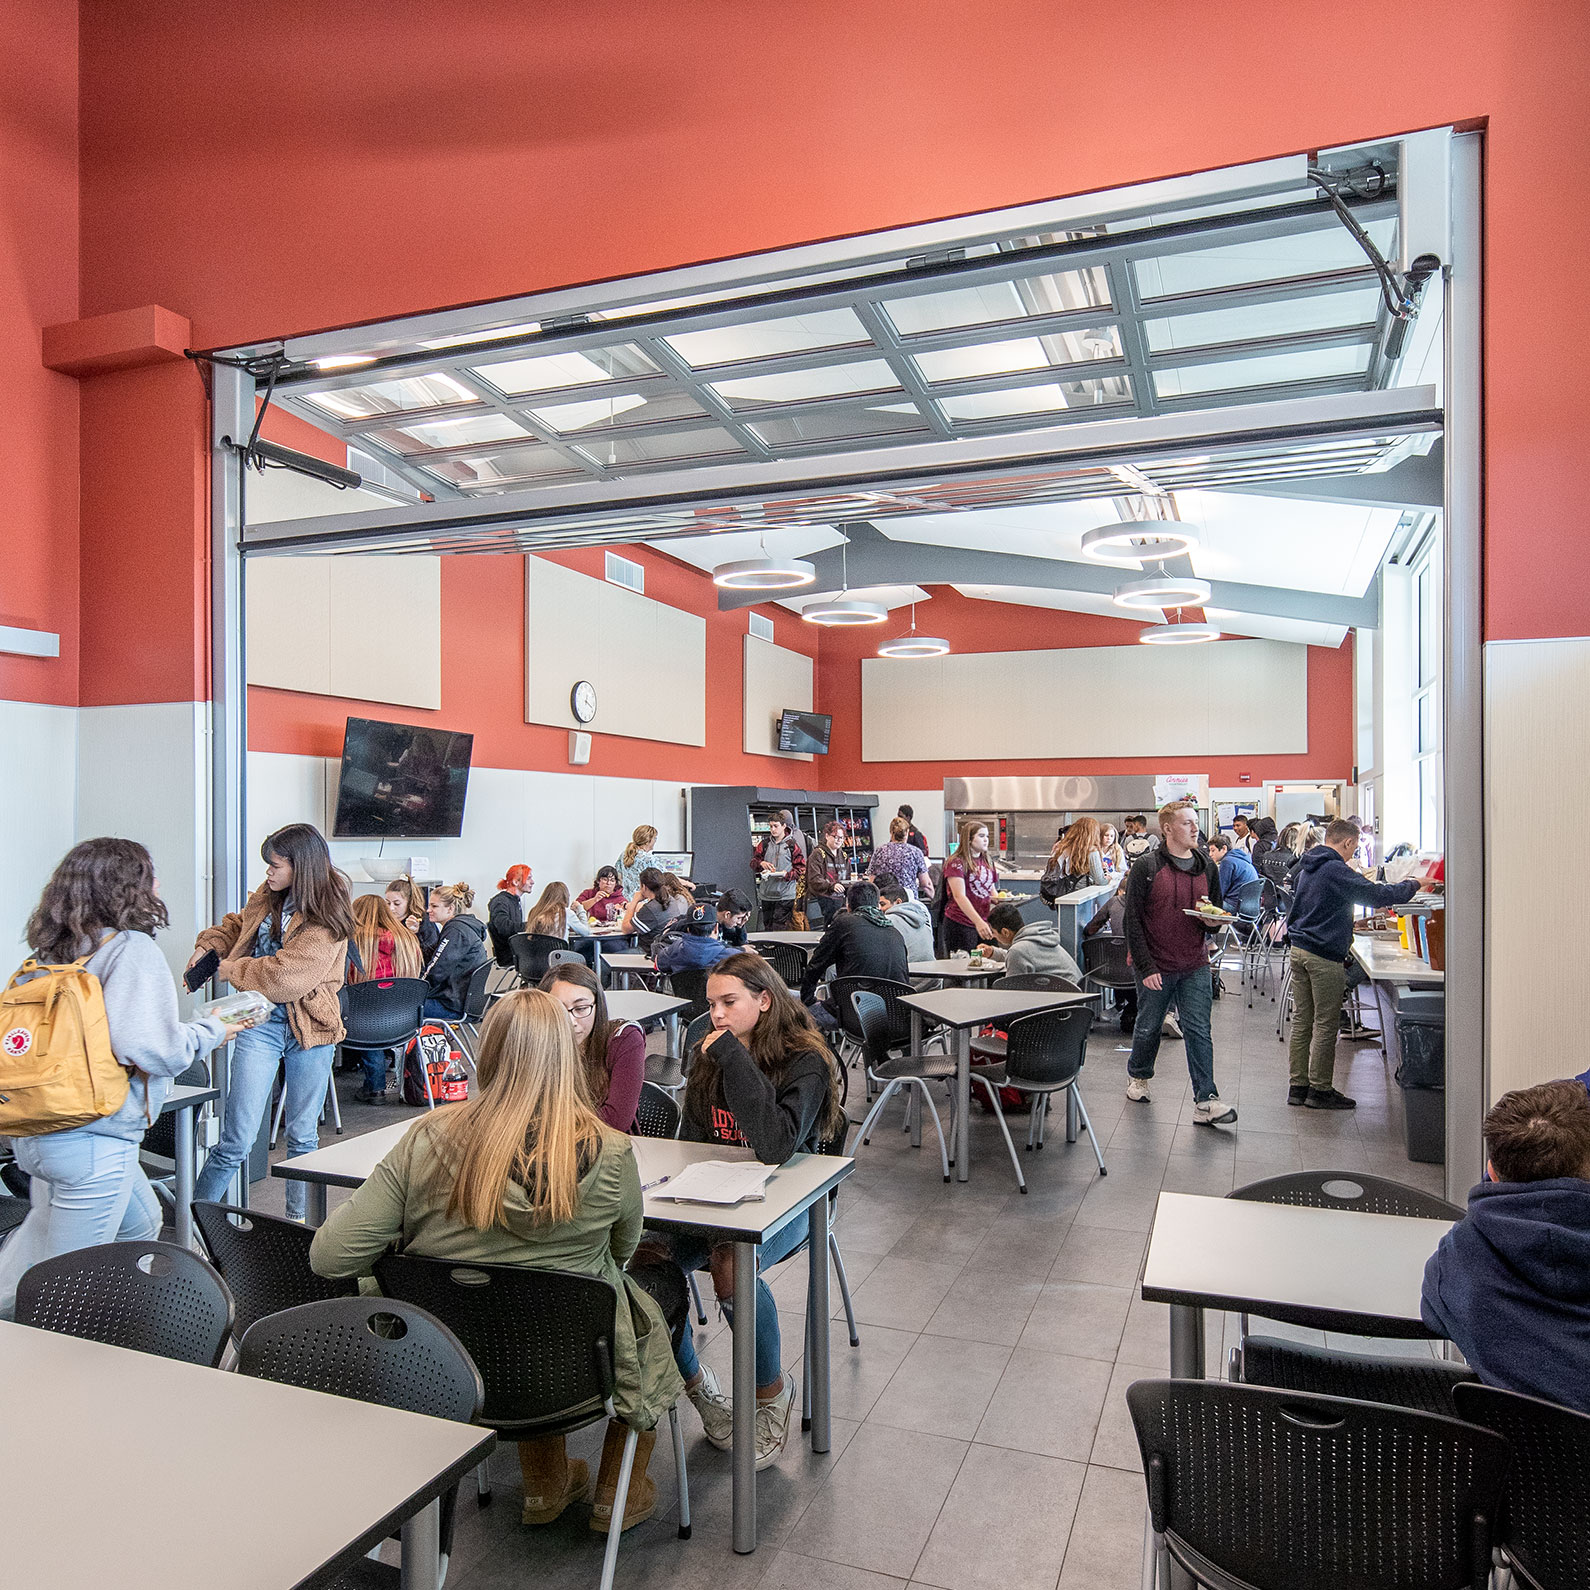 Lakeport Unified School District, TLCD Architecture, Central Kitchen, Clearlake High School